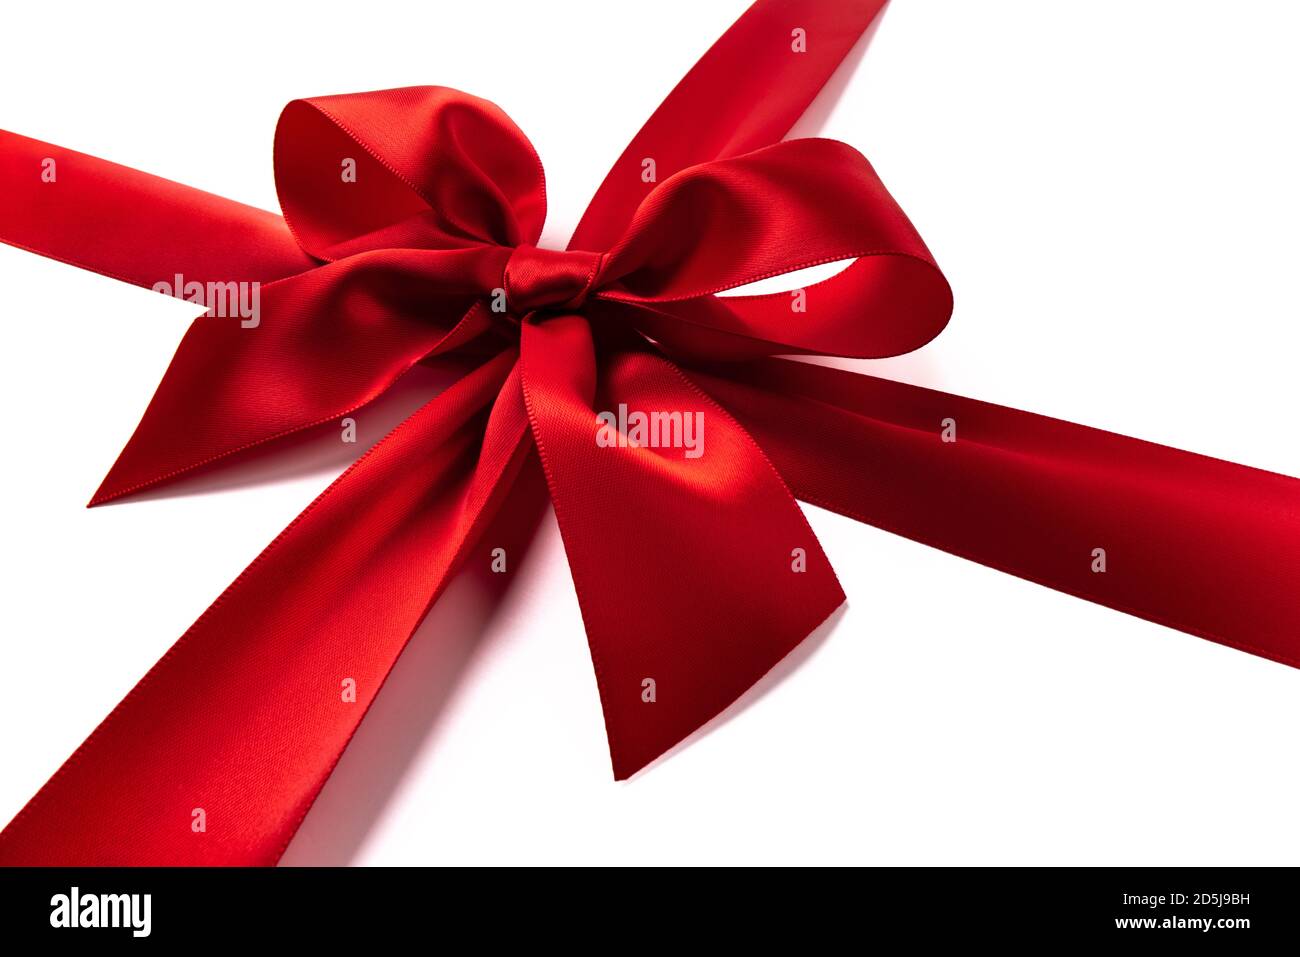 Red gift bow on white background Stock Photo